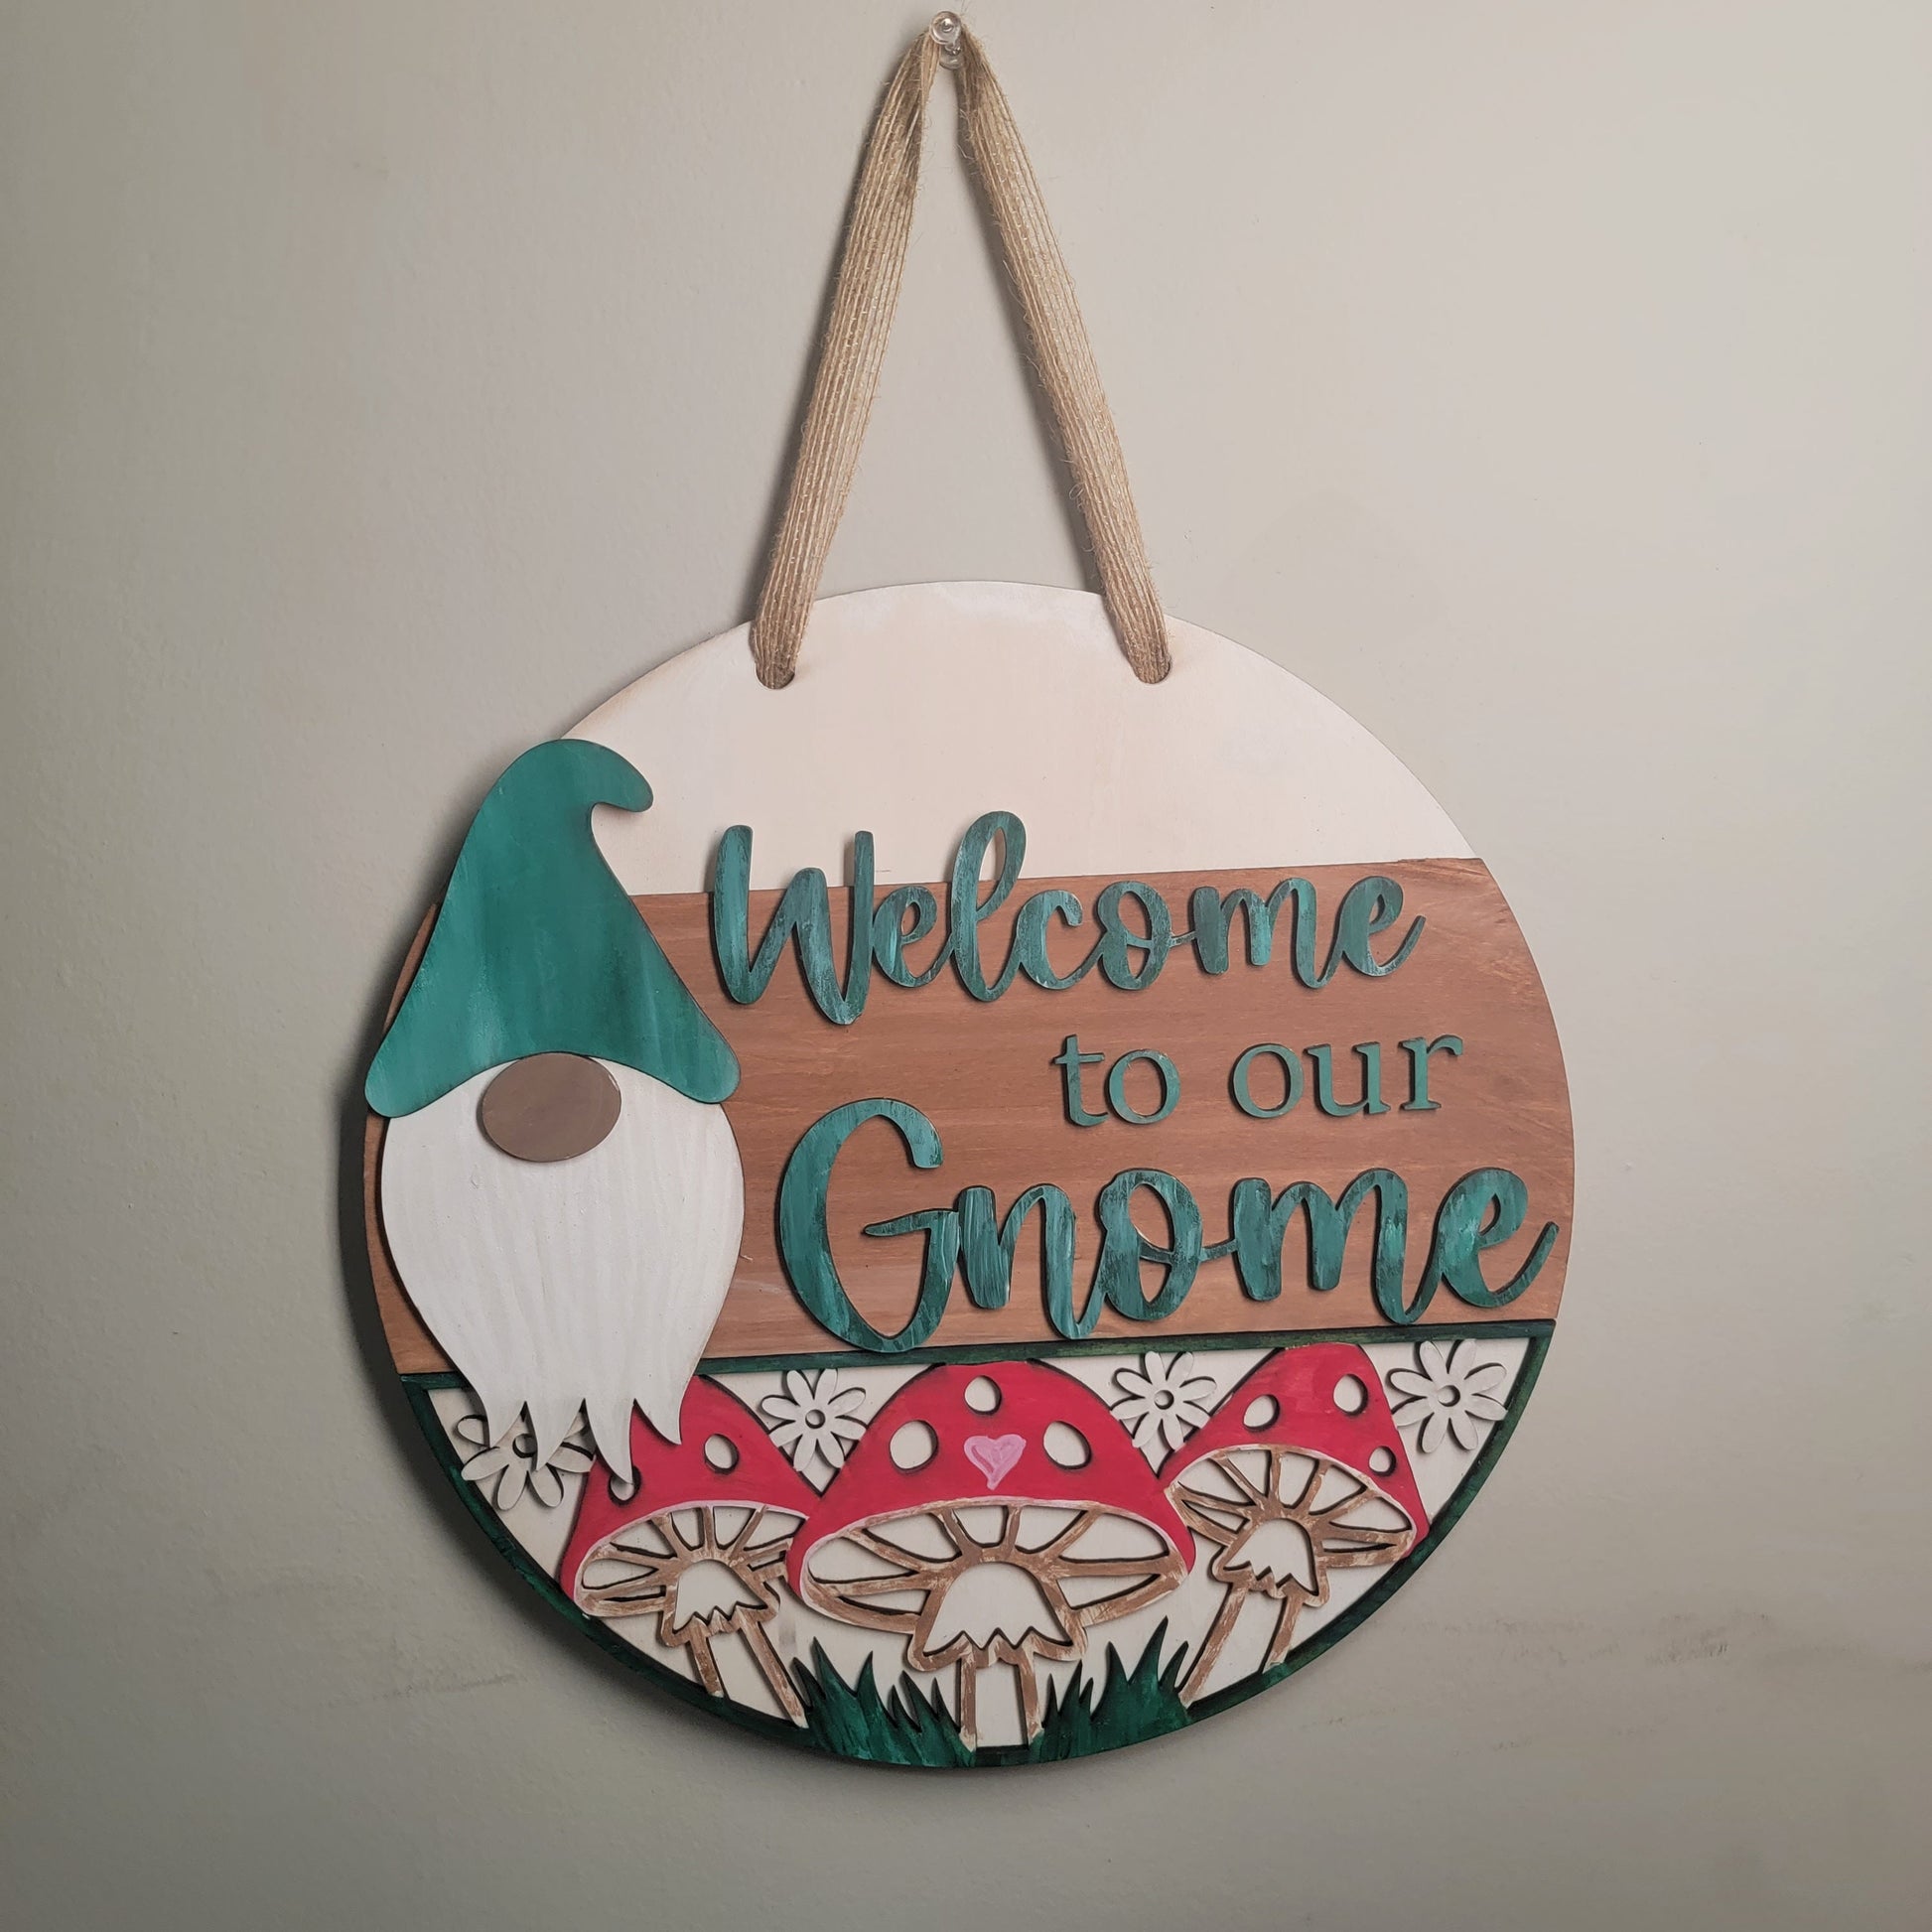 Welcome to our Gnome Sign/ Gnome Doorhanger/ Welcome Gnome Sign/ Gnome Decor